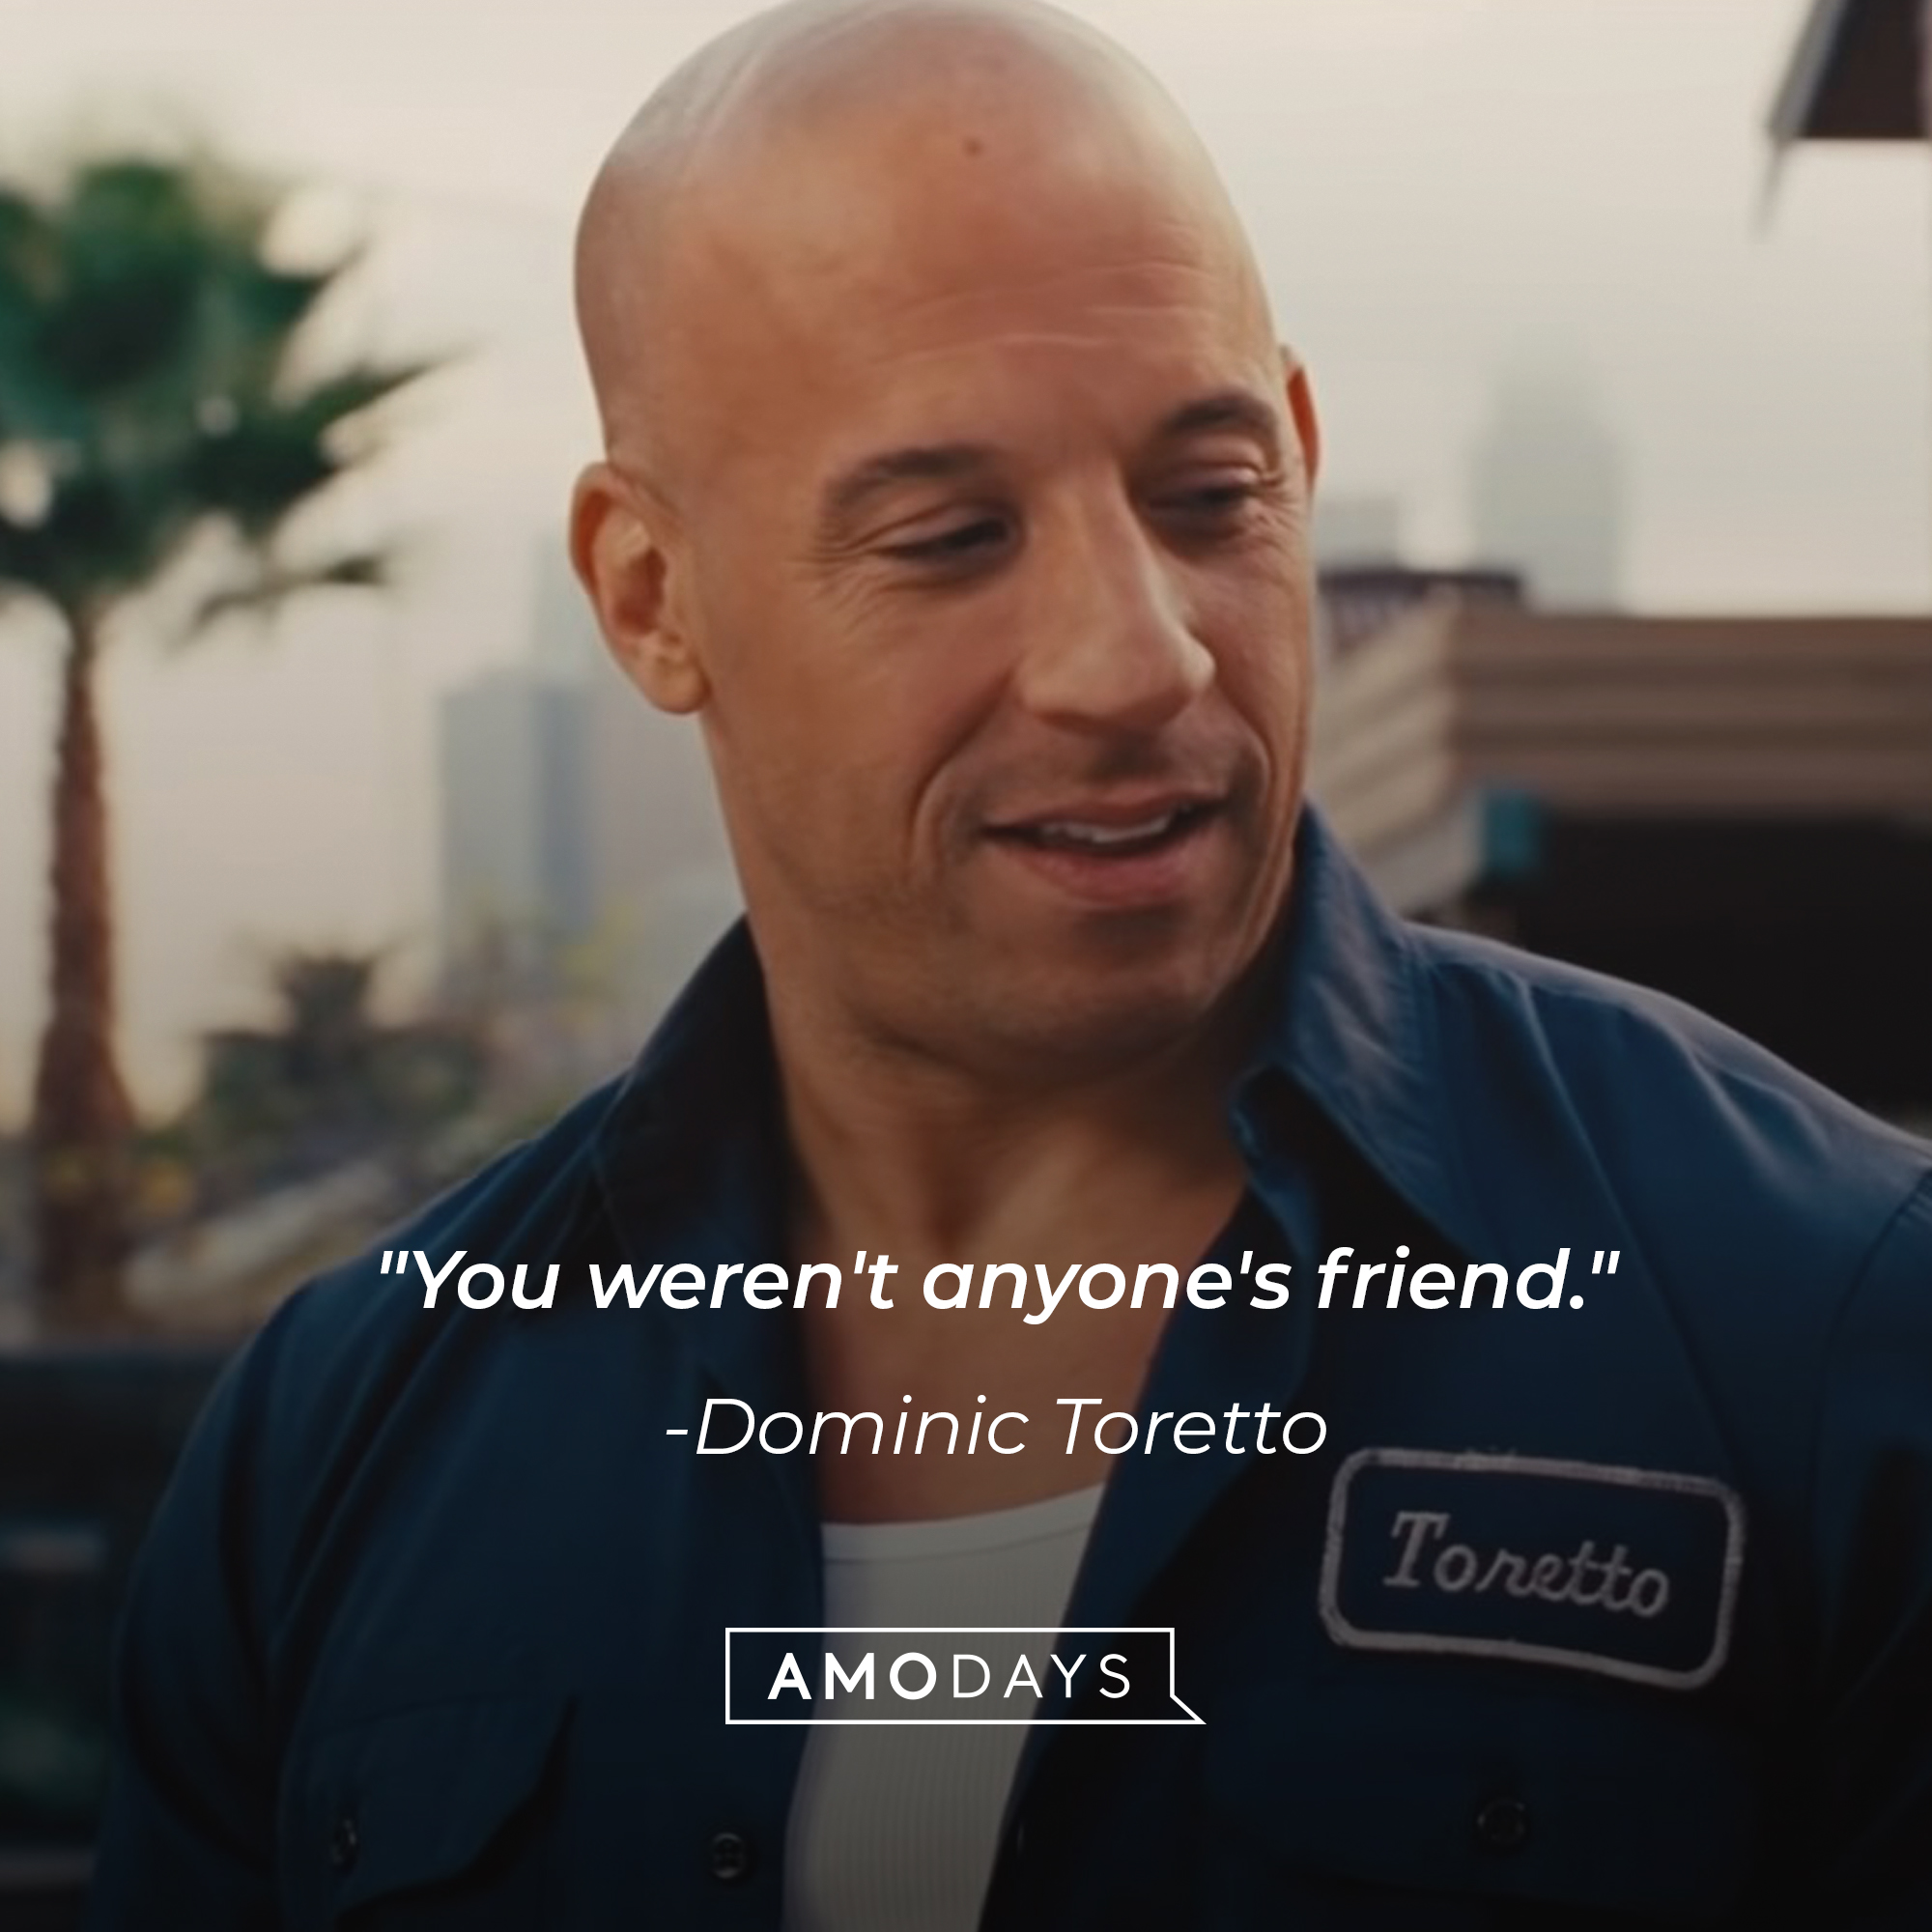 Dominic Toretto's quote: "You weren't anyone's friend." | Source: facebook.com/TheFastSaga